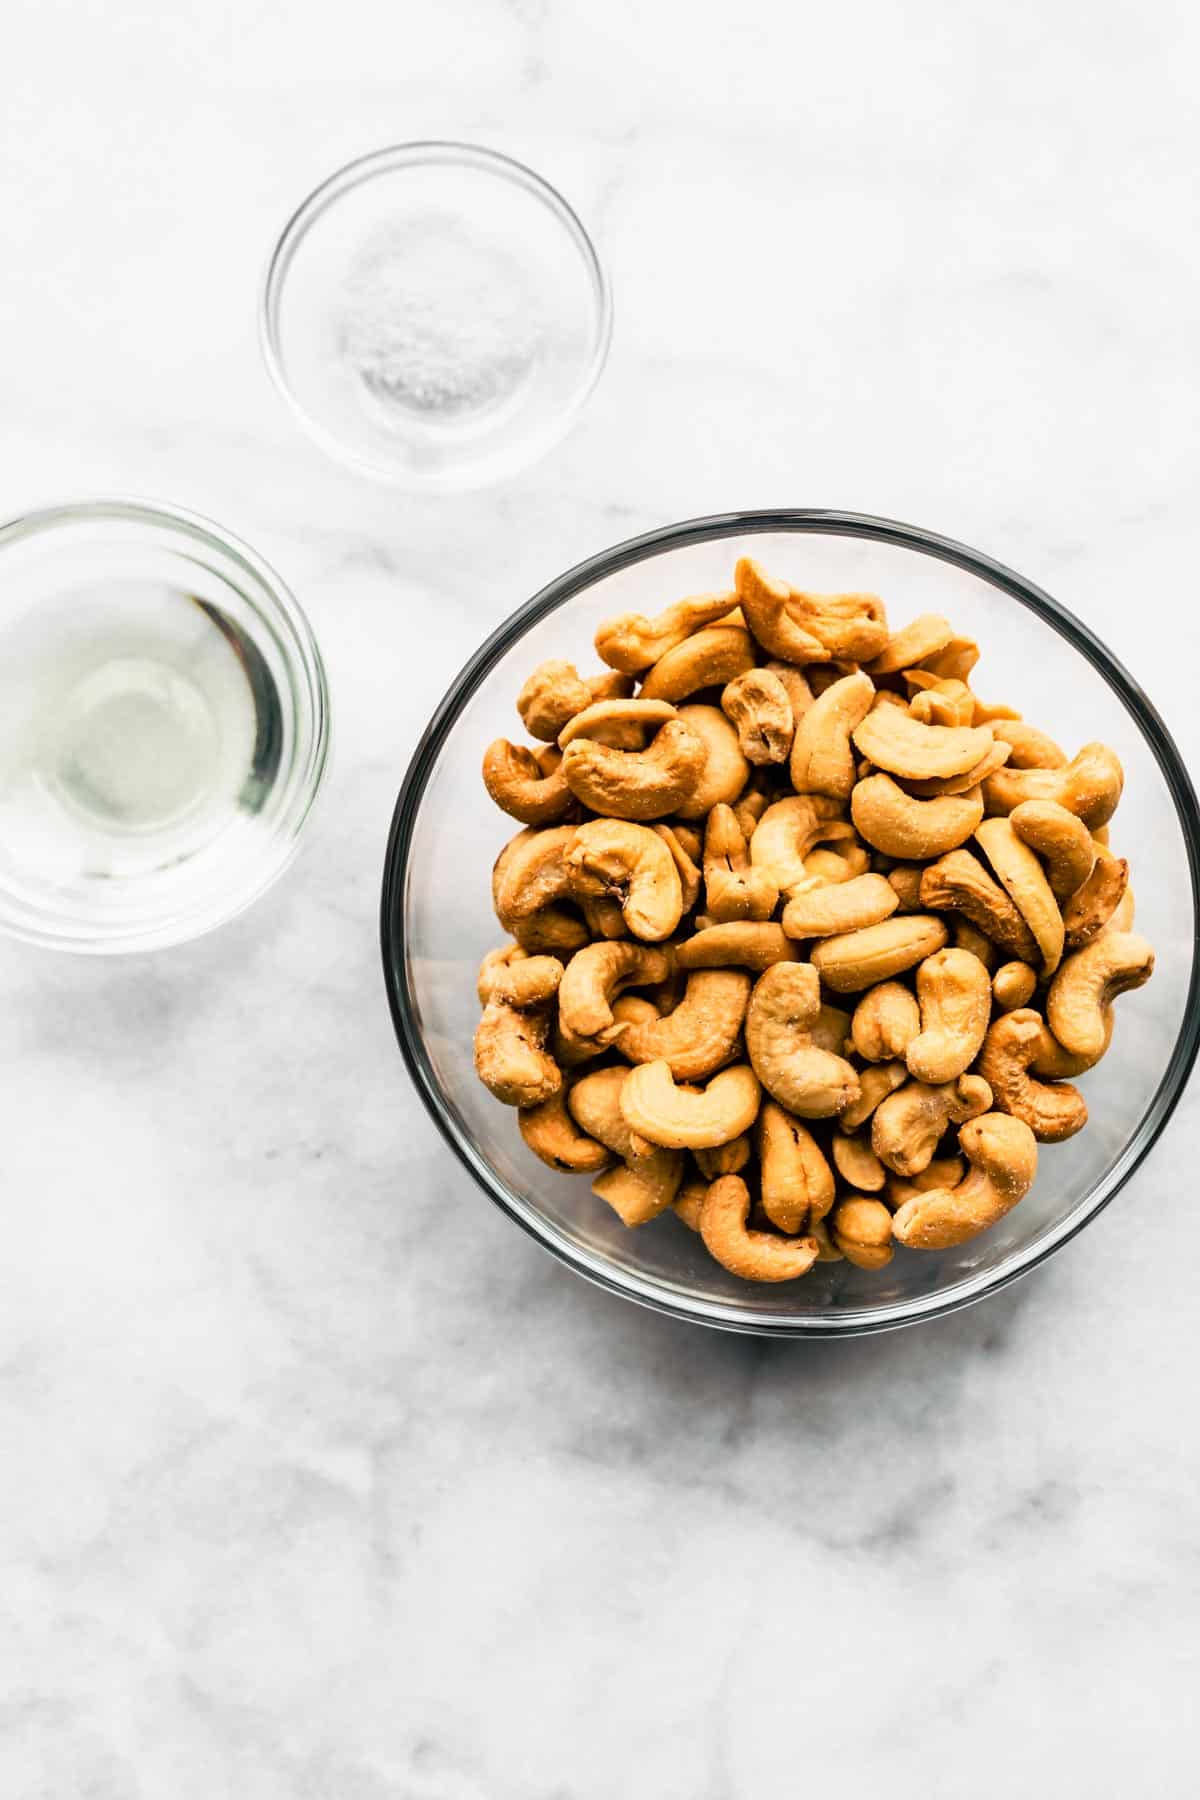 Separate bowls of raw cashews, coconut oil, and salt on a marble countertop.